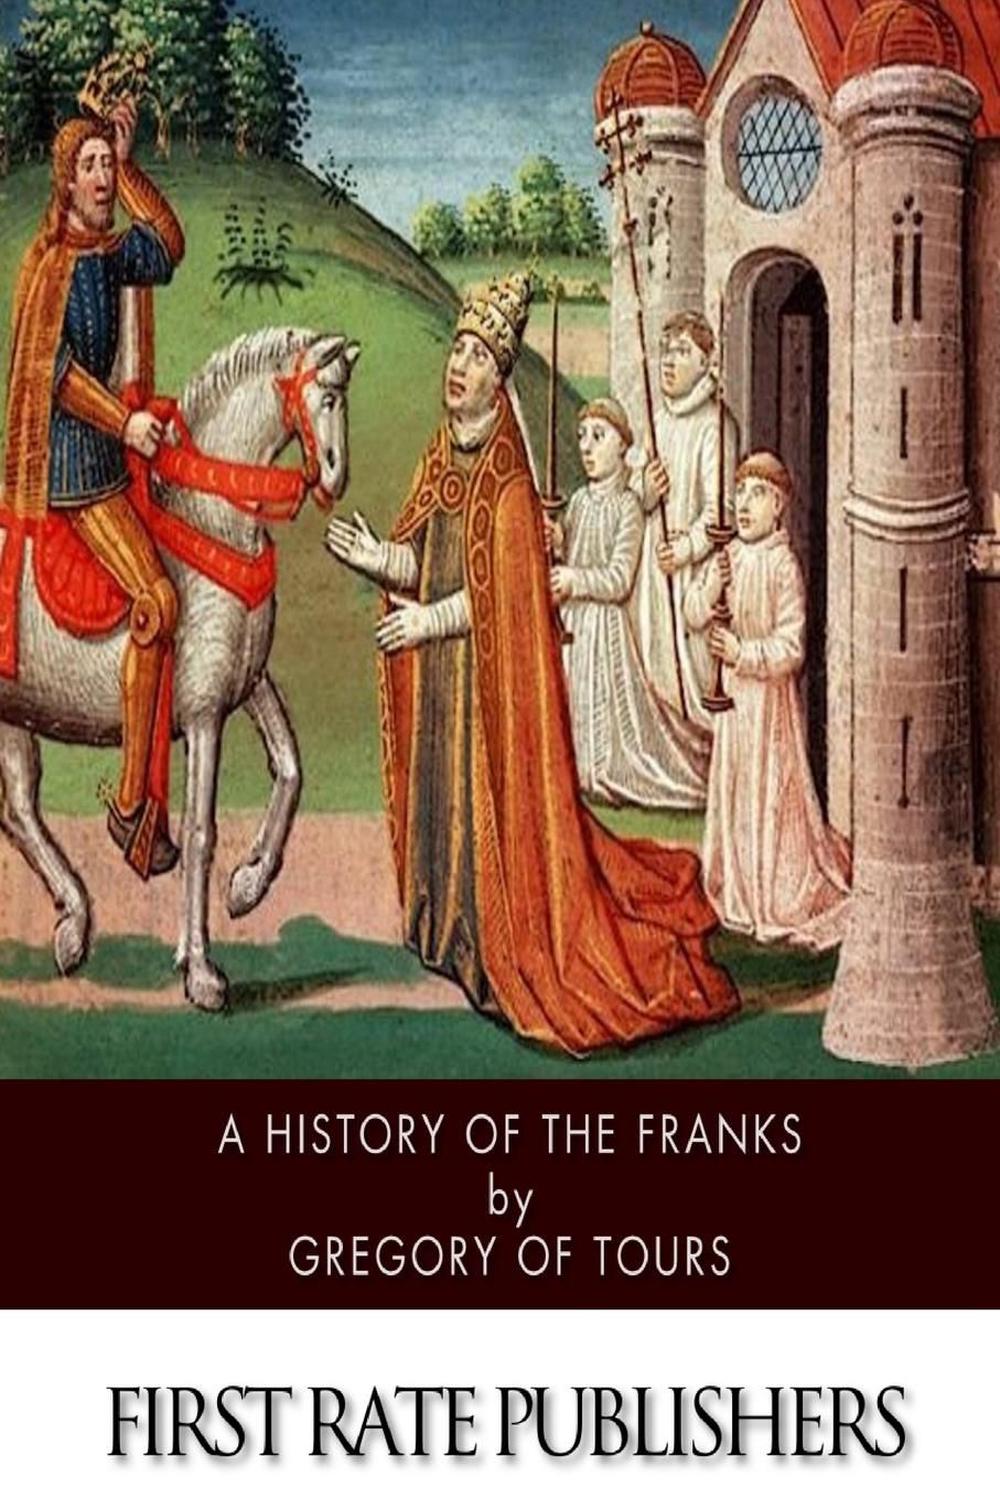 The History of the Franks by Gregory of Tours